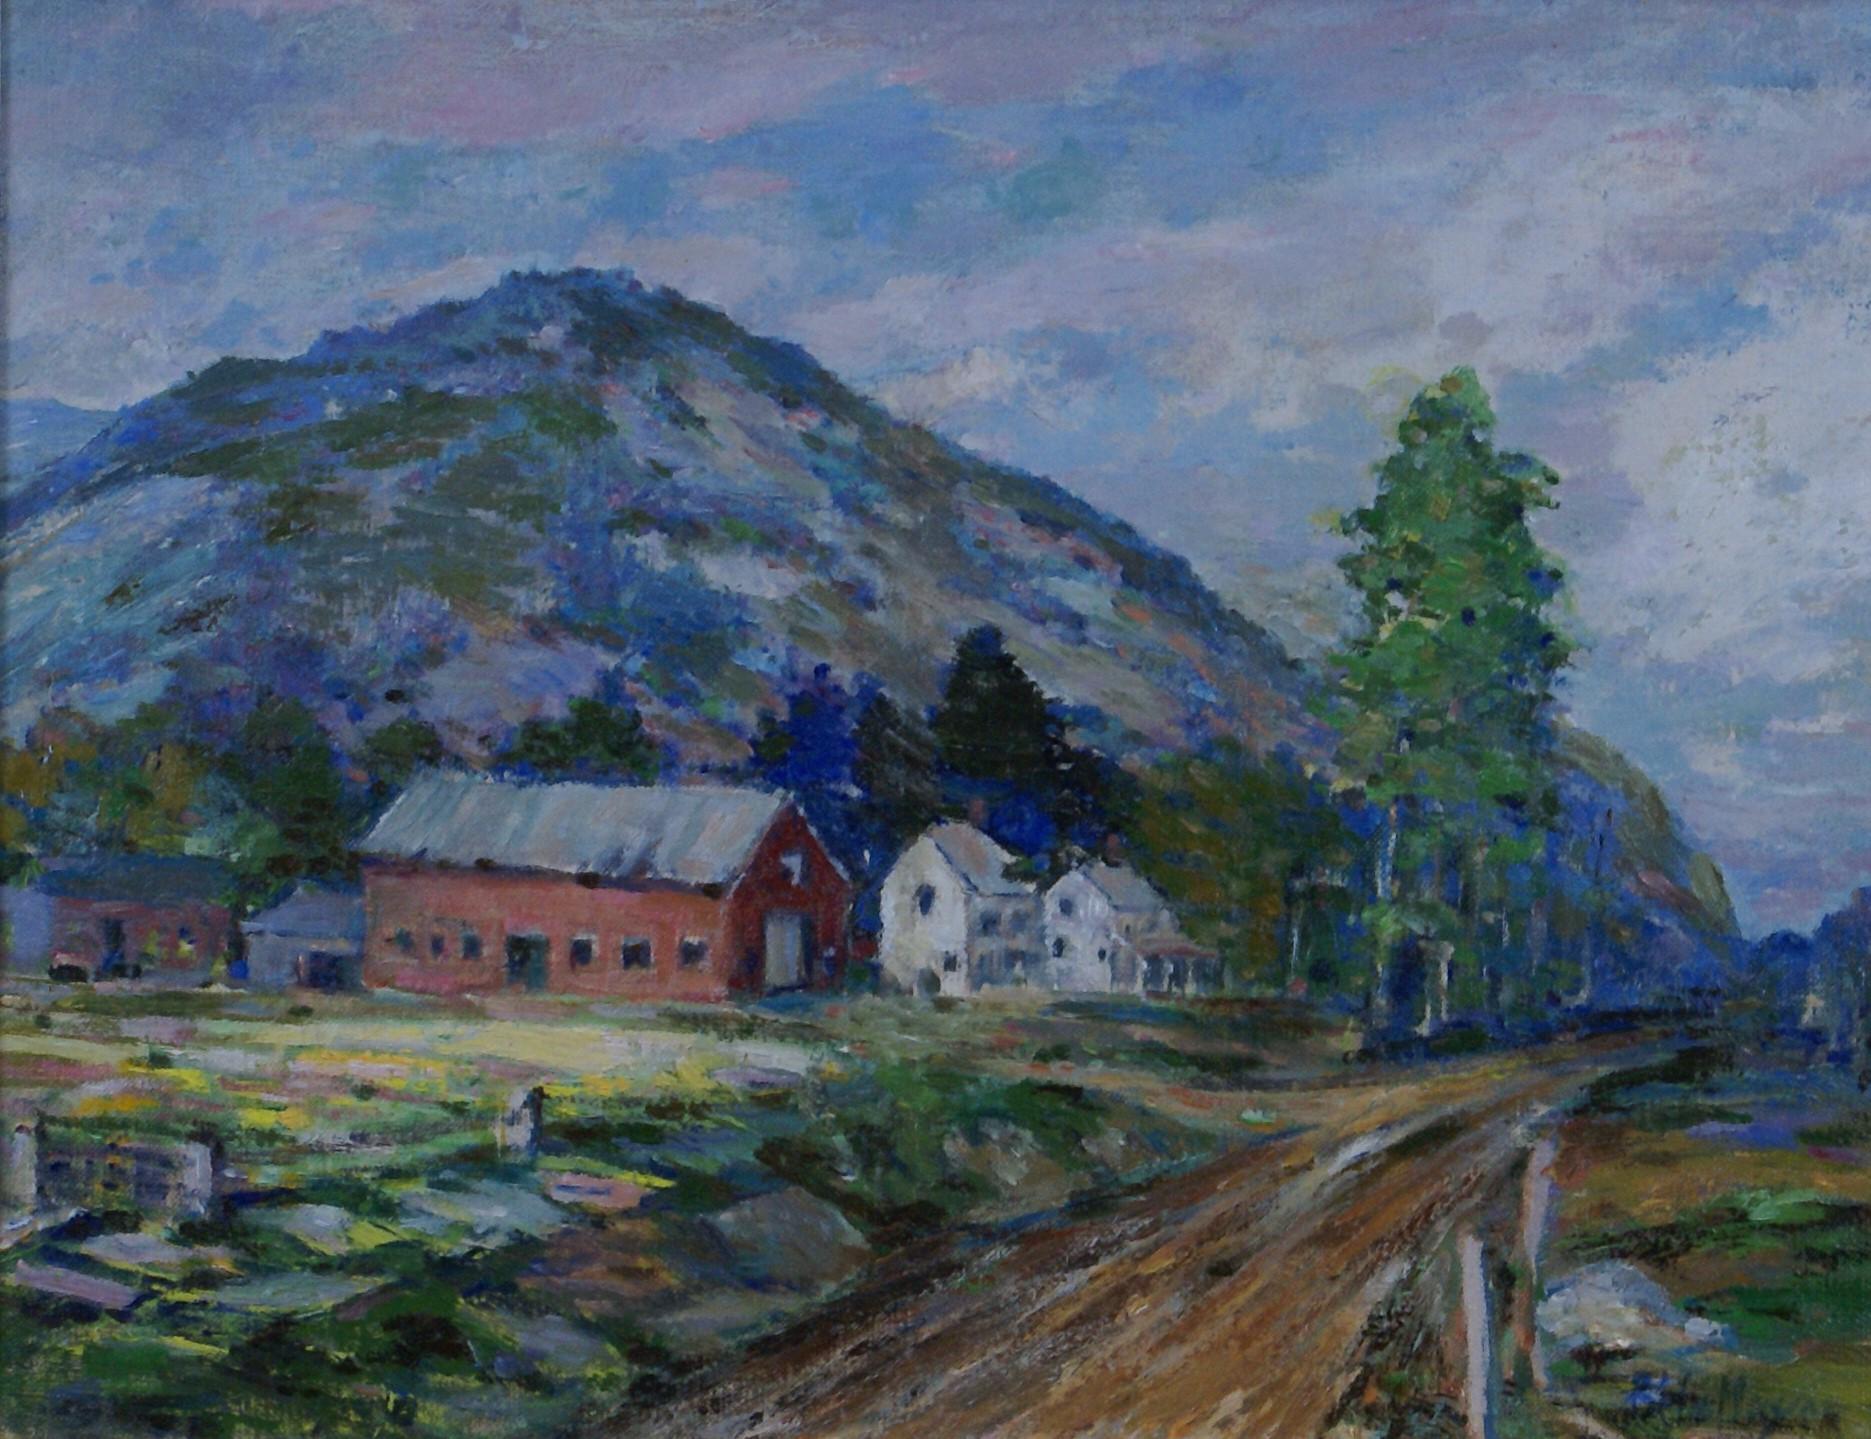 New Hampshire - Painting by Peter Bela Mayer